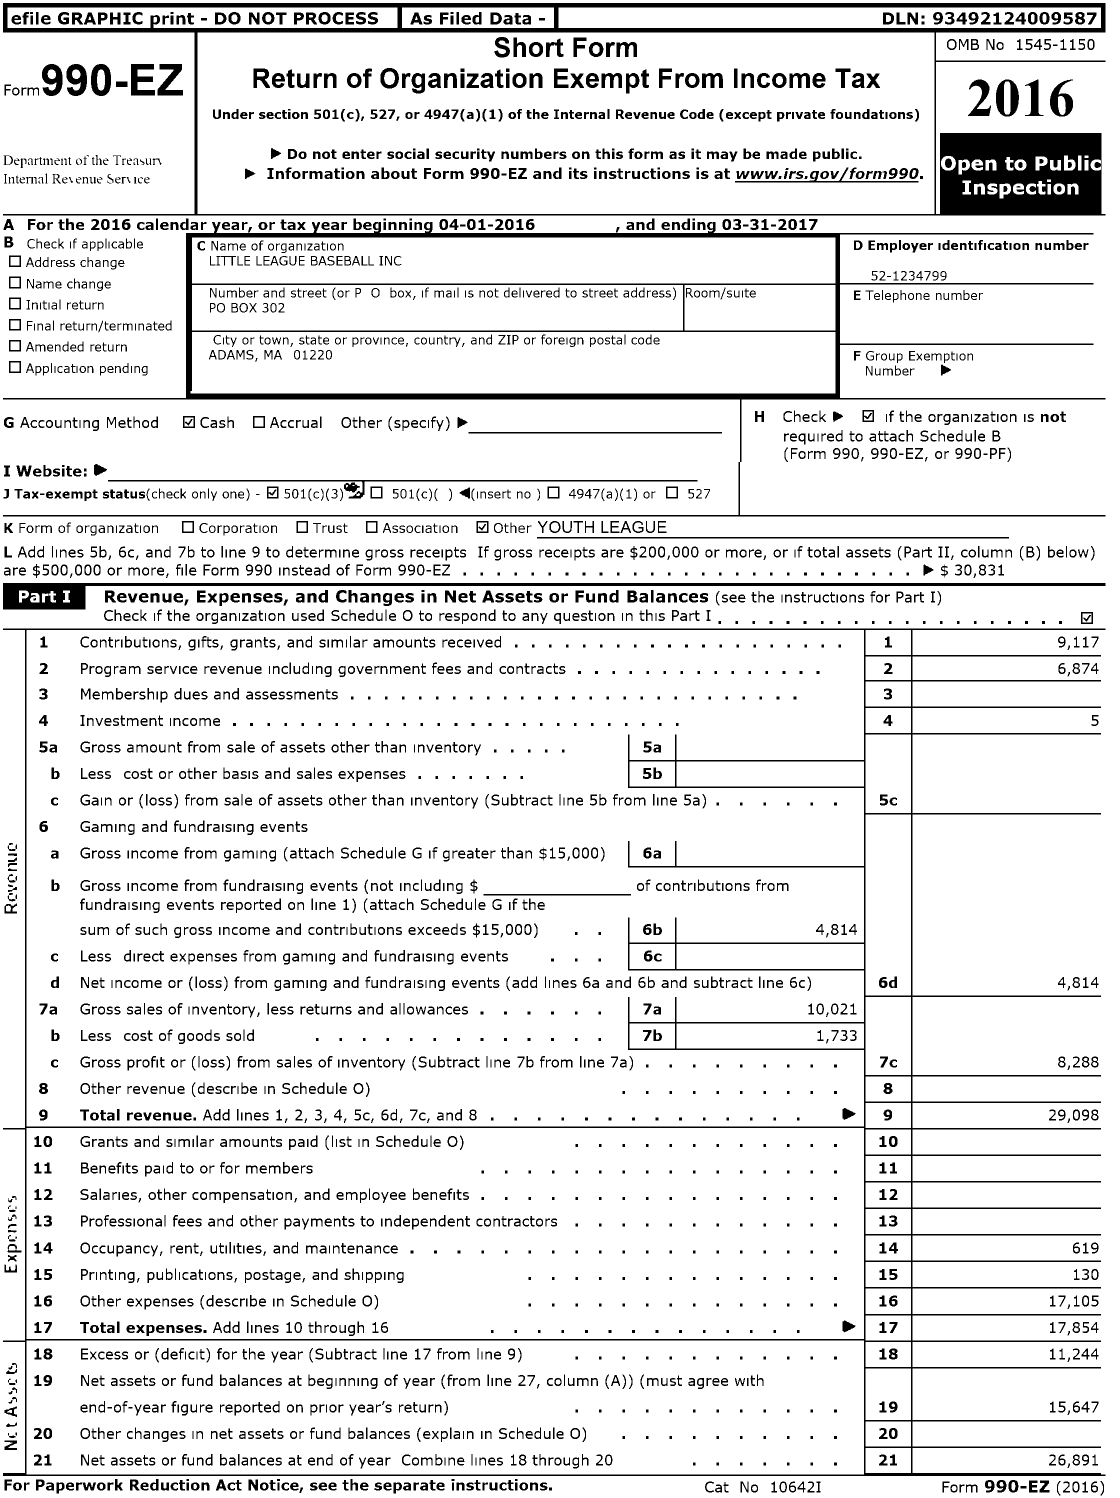 Image of first page of 2016 Form 990EZ for Little League Baseball